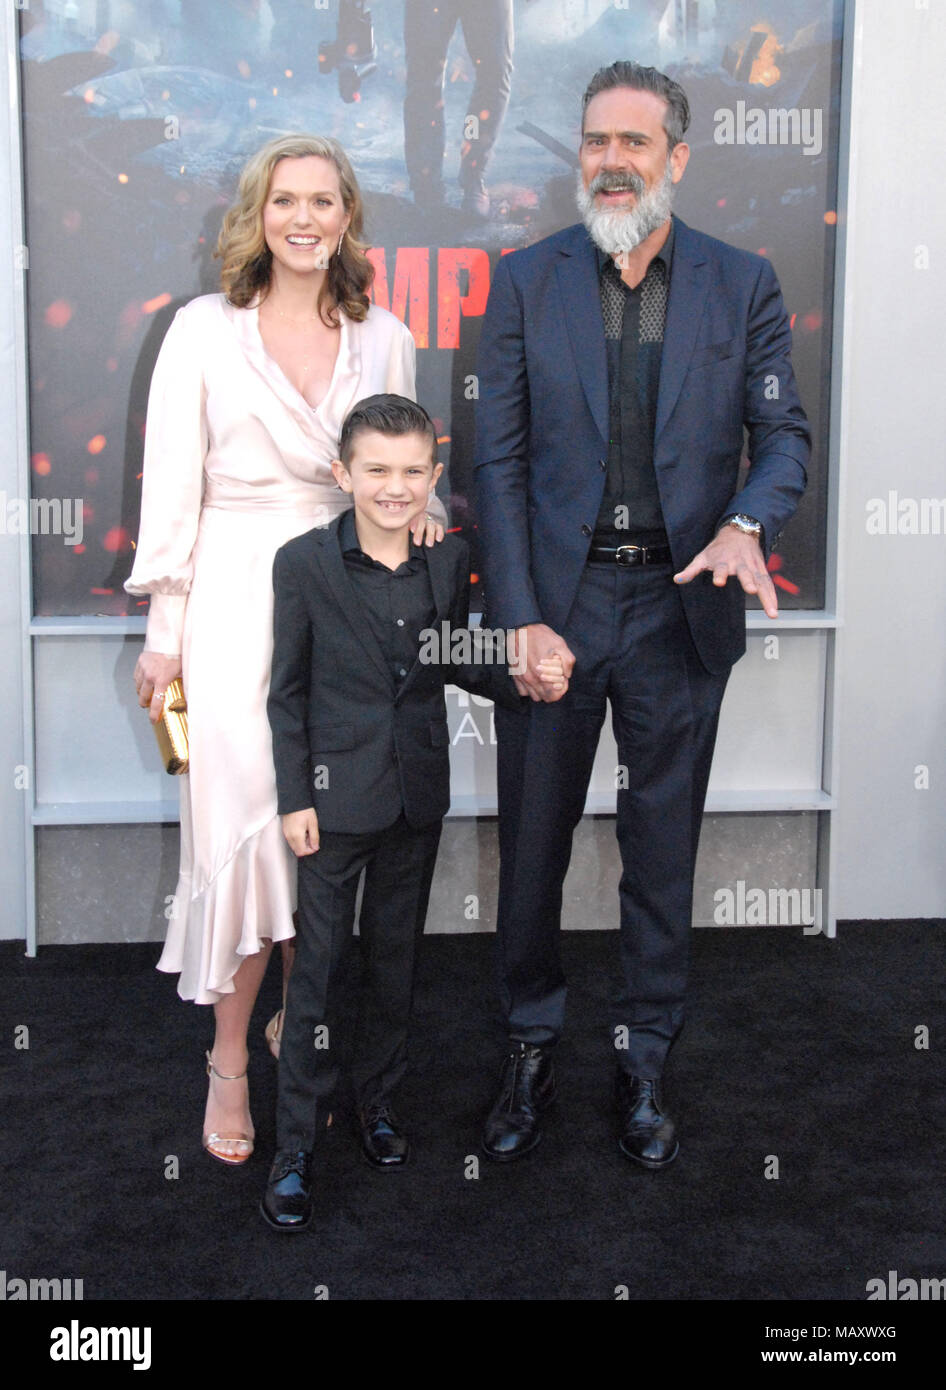 LOS ANGELES, CA - APRIL 04: (L-R) Actress Hilarie Burton, Augustus Morgan  and actor Jeffrey Dean Morgan attend the premiere of Warner Bros. Pictures'  'Rampage' at Microsoft Theater on April 4, 2018